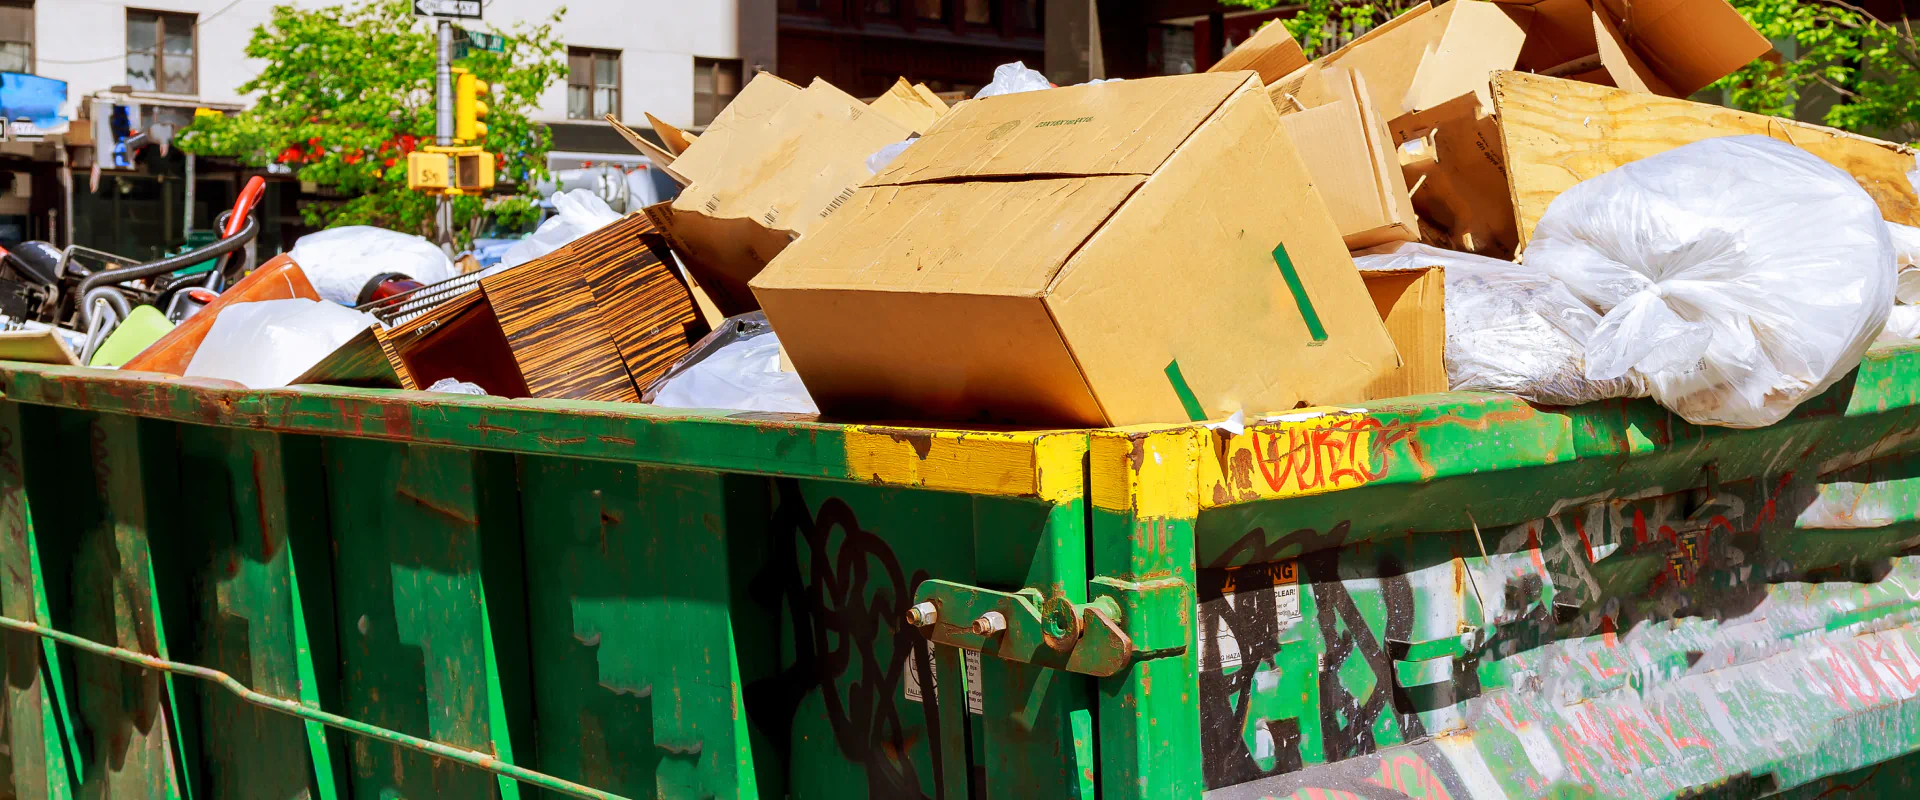 green dumpster with some cardboard boxes on it